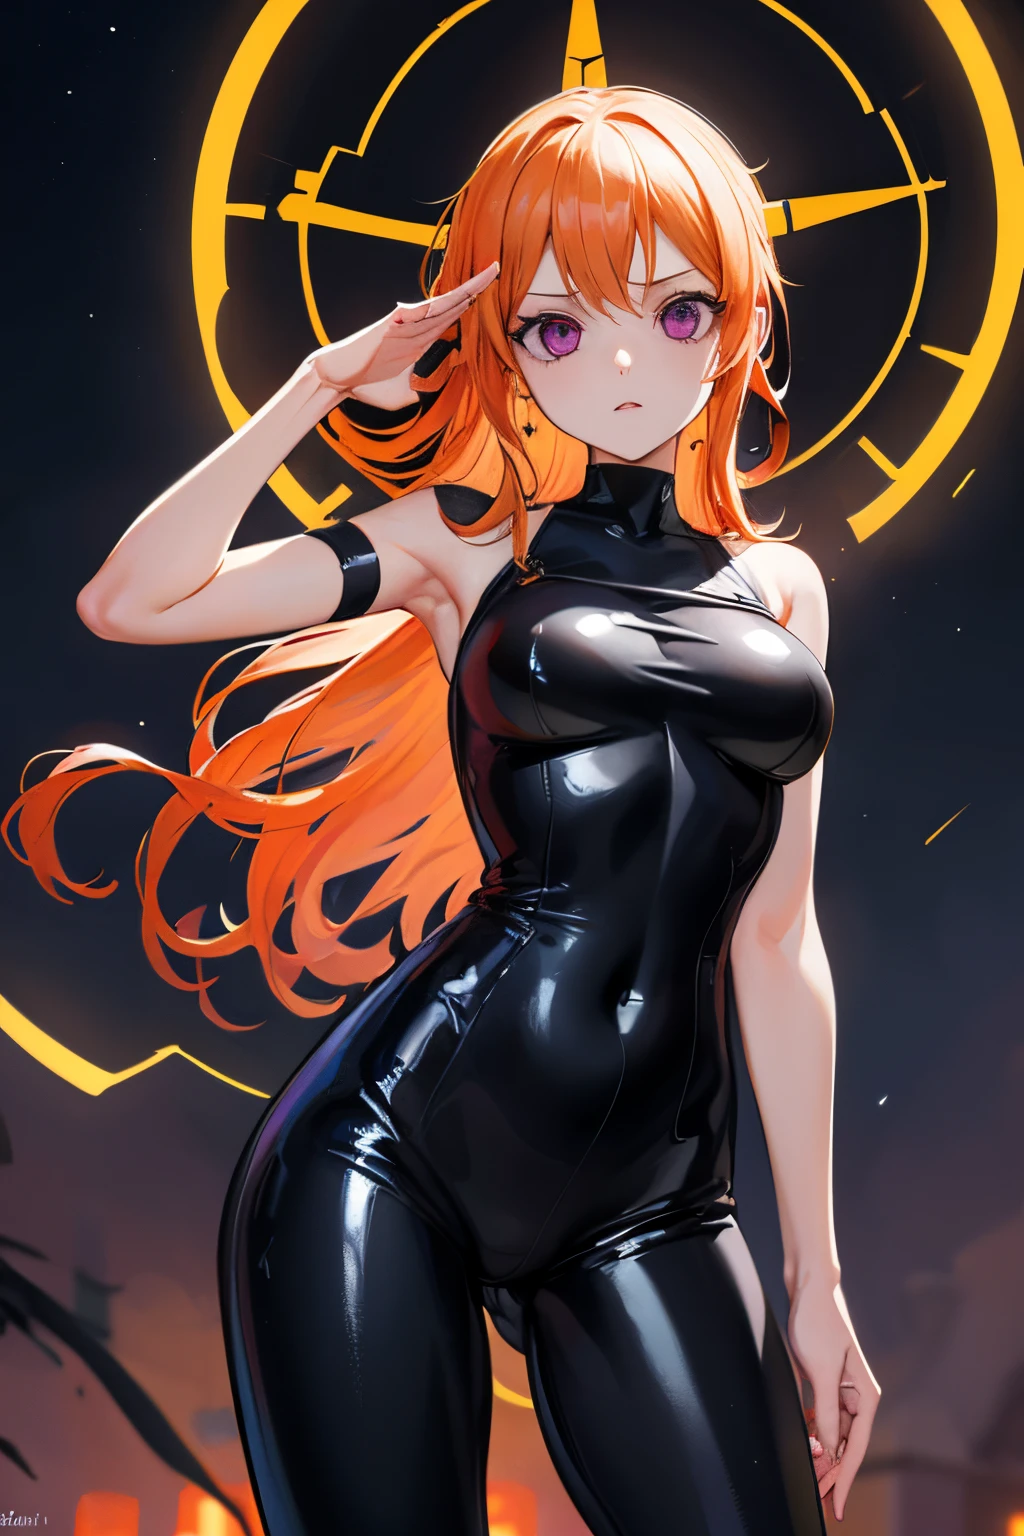 {1girl in},{{{{{masutepiece++, Best Quality++, Ultra-detailed+, 超A high resolution,(Photorealistic:1.4),Raw photo,(Nami)+,(Nami)+,(One Piece NAMI)+,(Onepiece),Orange hair, Girl in black latex full body suit,very aesthetic, Best Quality, absurderes, 1girl in, Brainwashed,}}}}}, ((Purple glowing eyes 1.2)), Big breasts,deadpan, darkness ,(Night:1.5),stand and salute